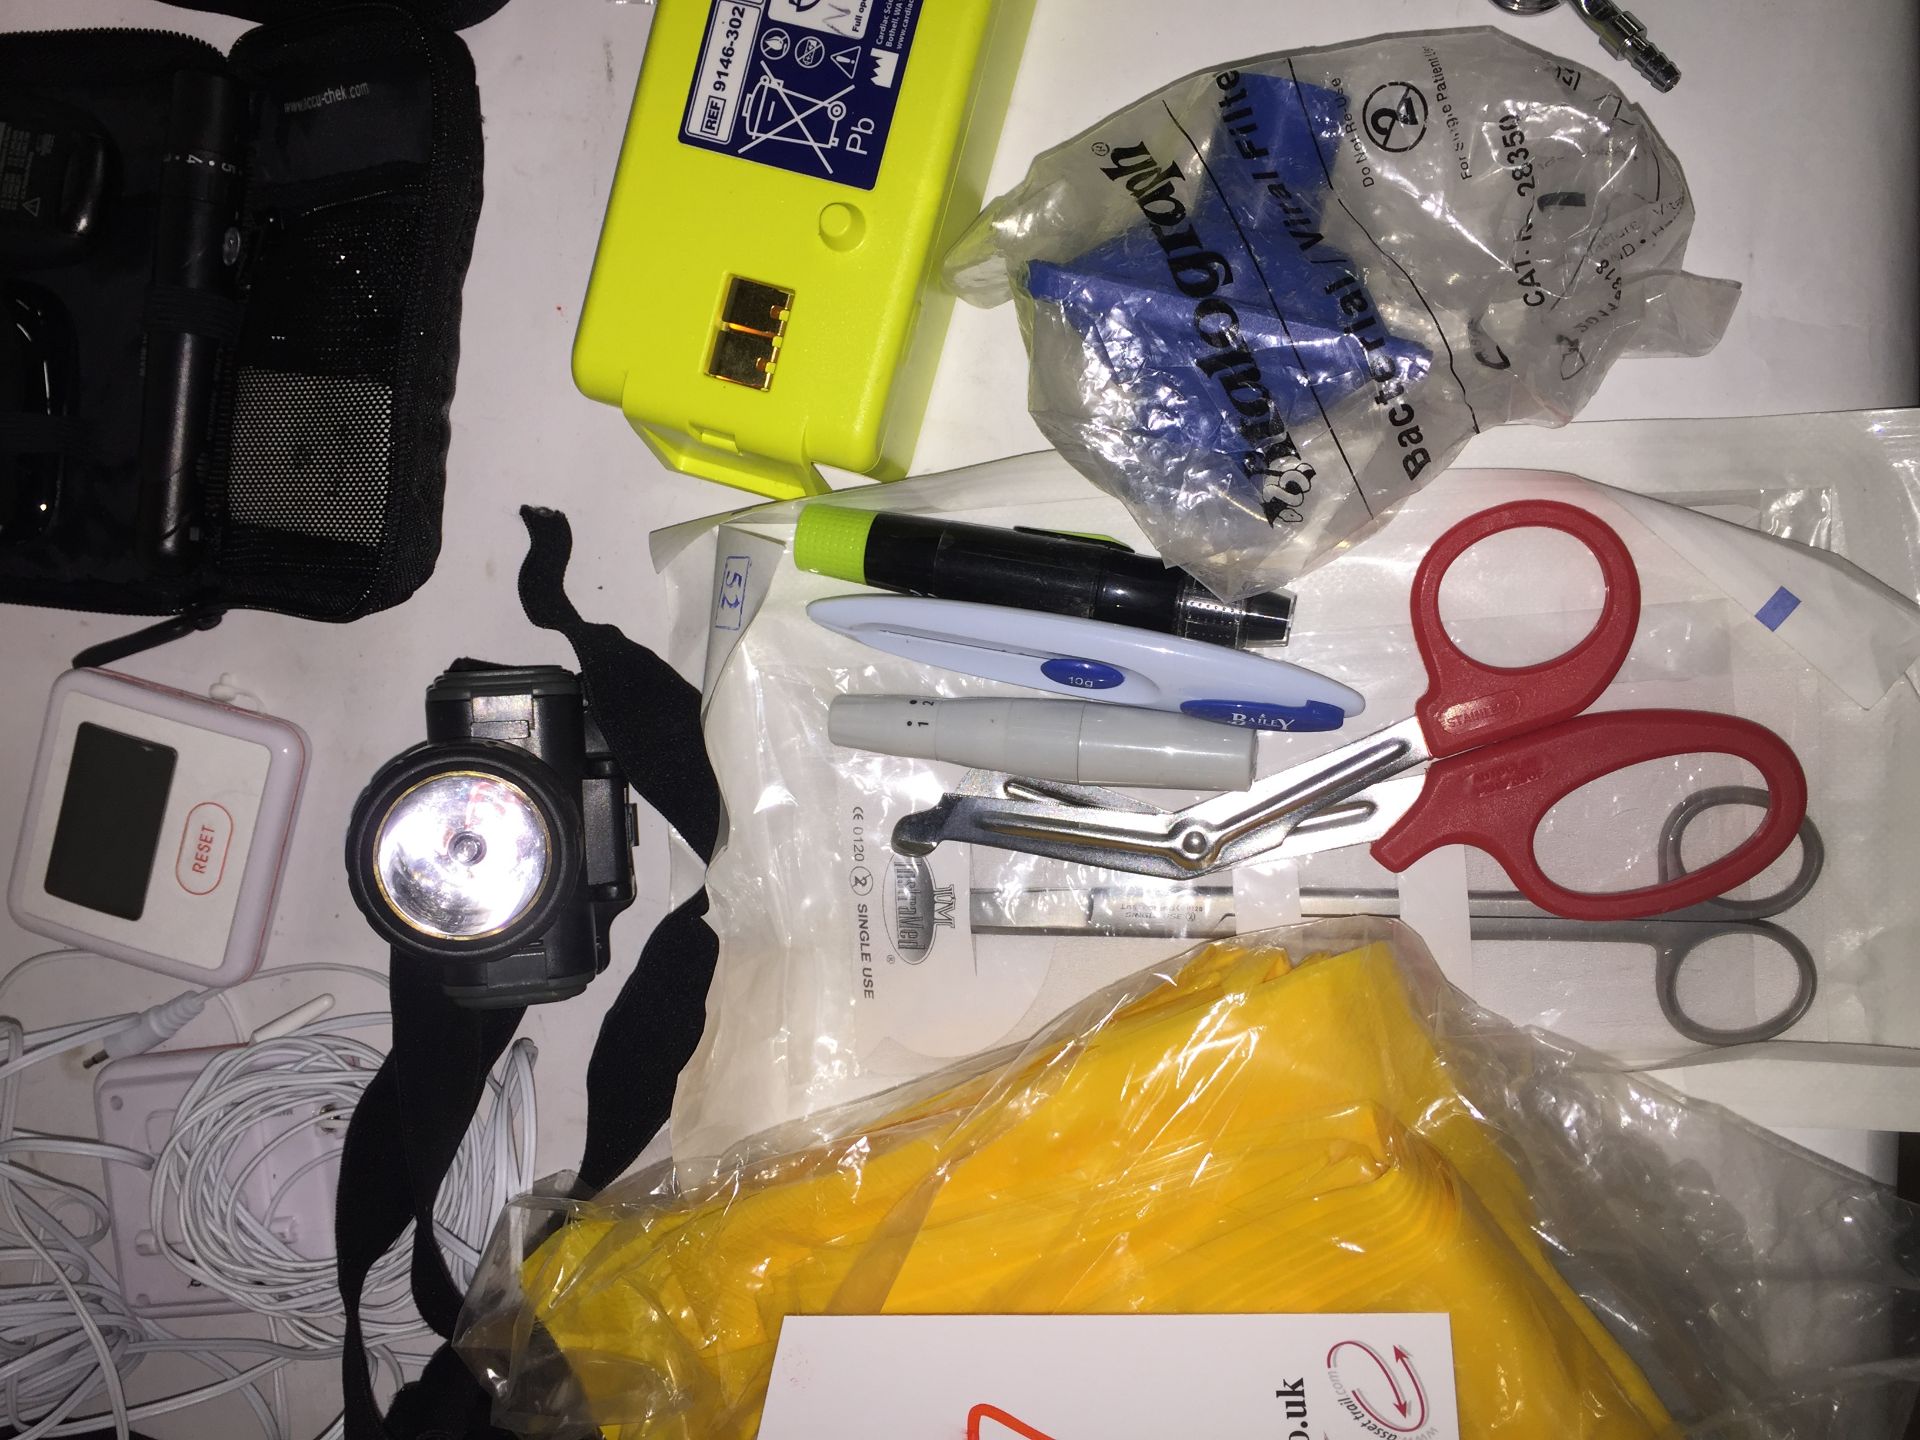 MIX LOT | Box of medical accessories including... - Image 5 of 5